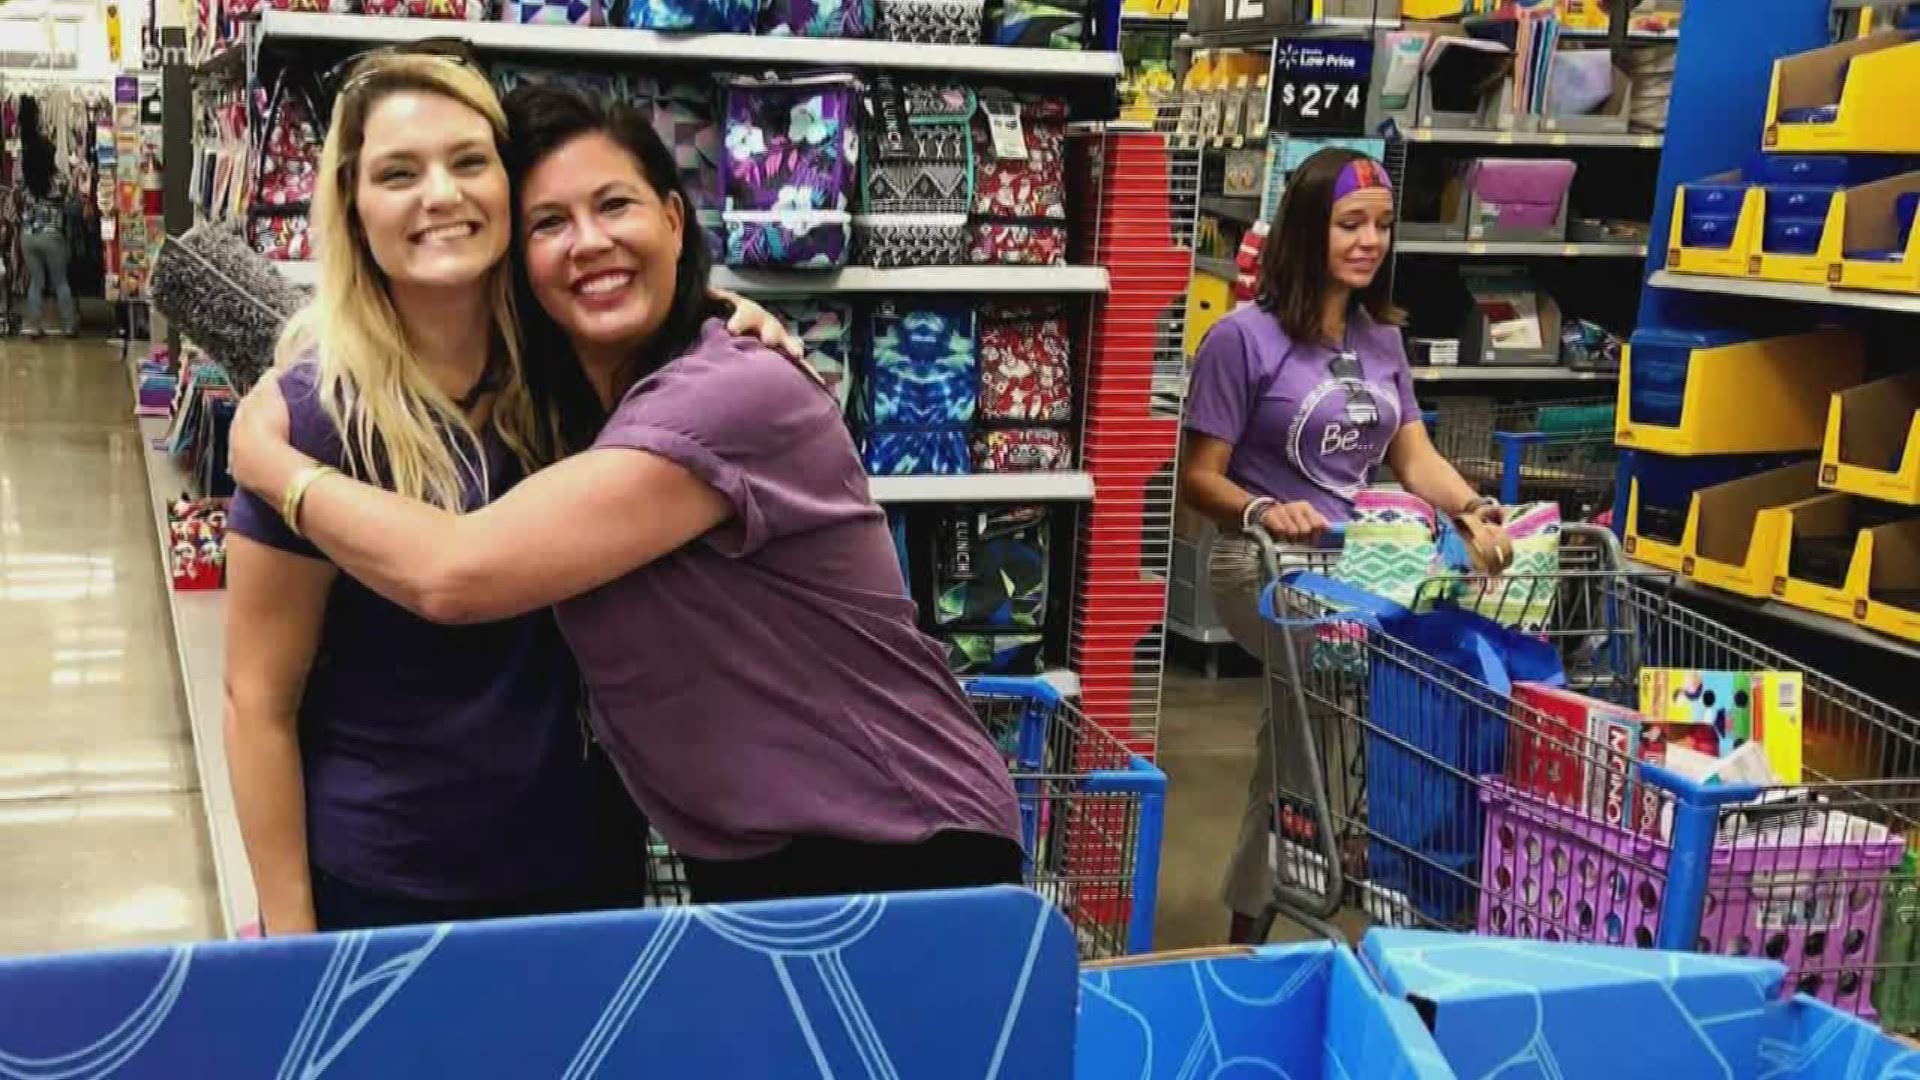 Granbury teachers received an unexpected gift from the school board. On Tuesday, the teachers were told to get in their cars and head to Walmart. Each person received $100 to buy school supplies for their students.